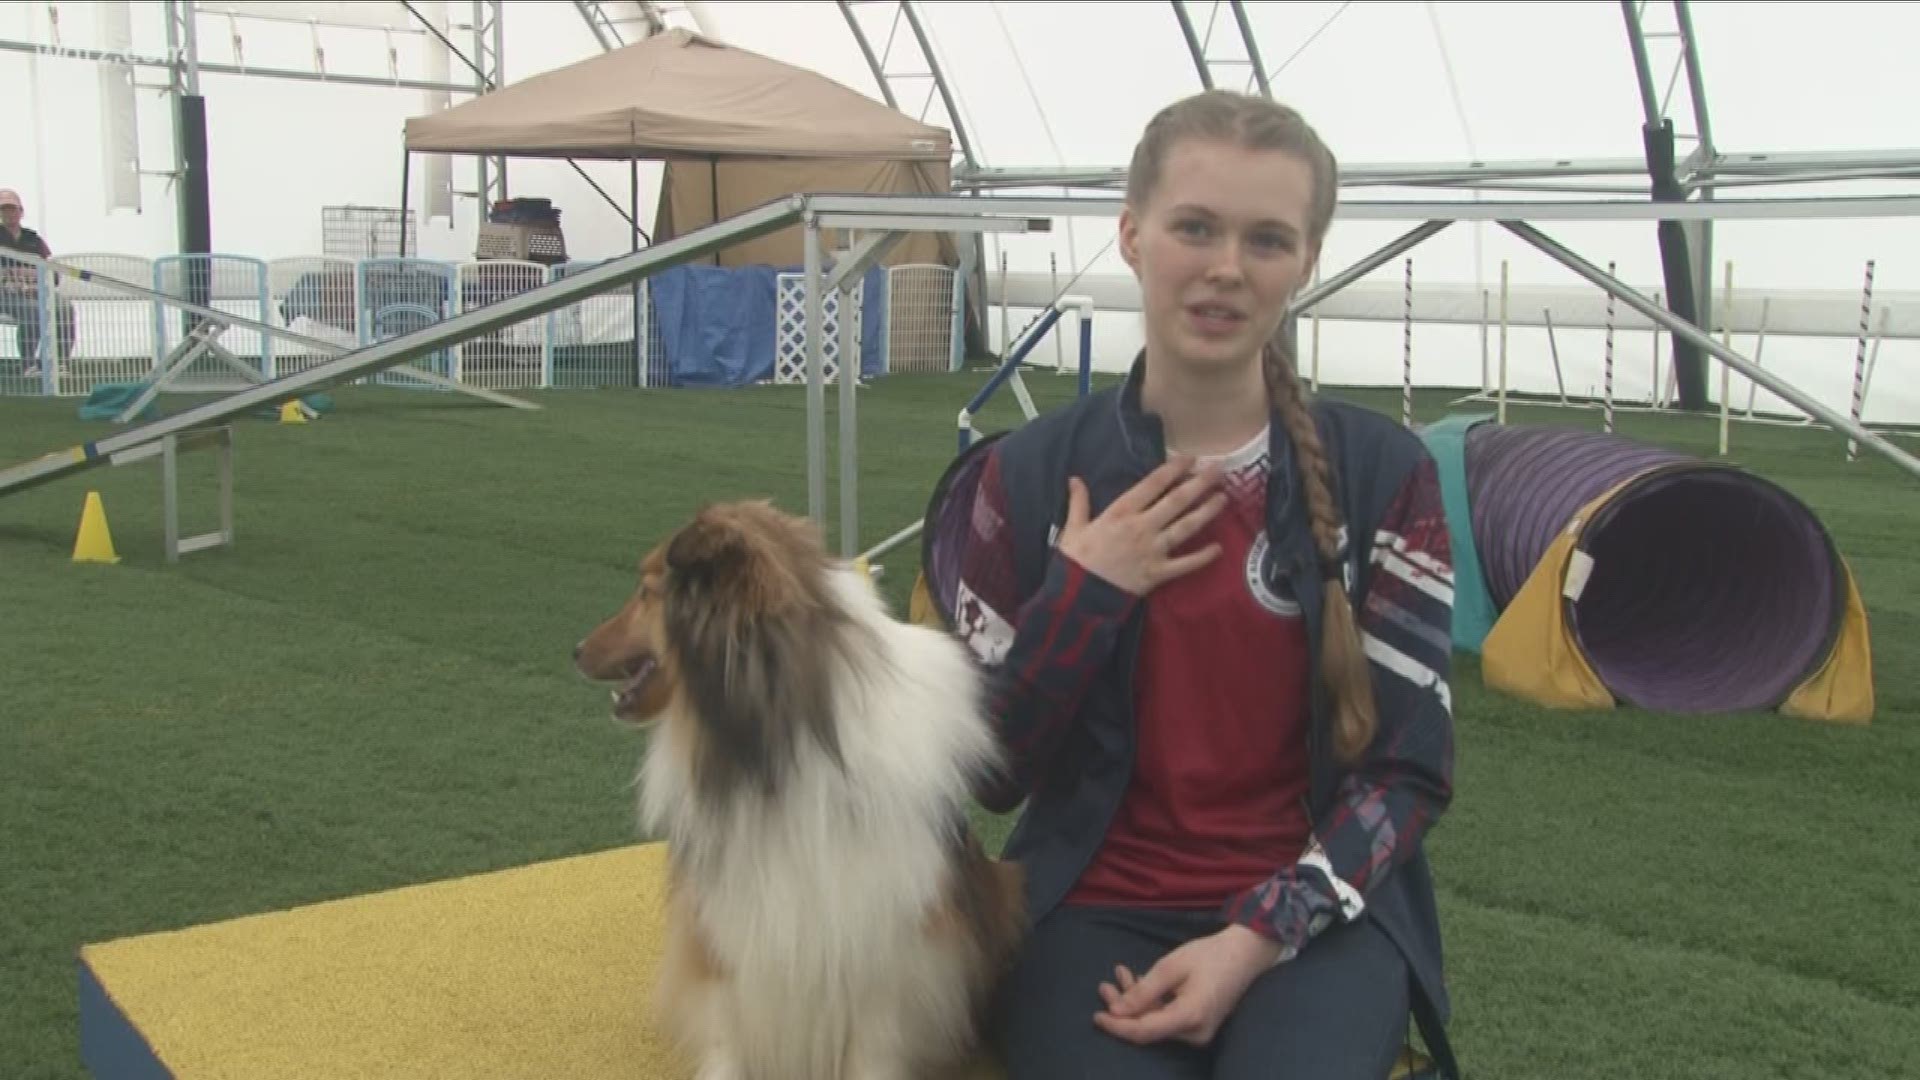 The 15-yr-old from rural Orleans County will go to Switzerland with the Shetland Sheepdog to compete in American Kennel Club’s European Open Juniors Agility contest.